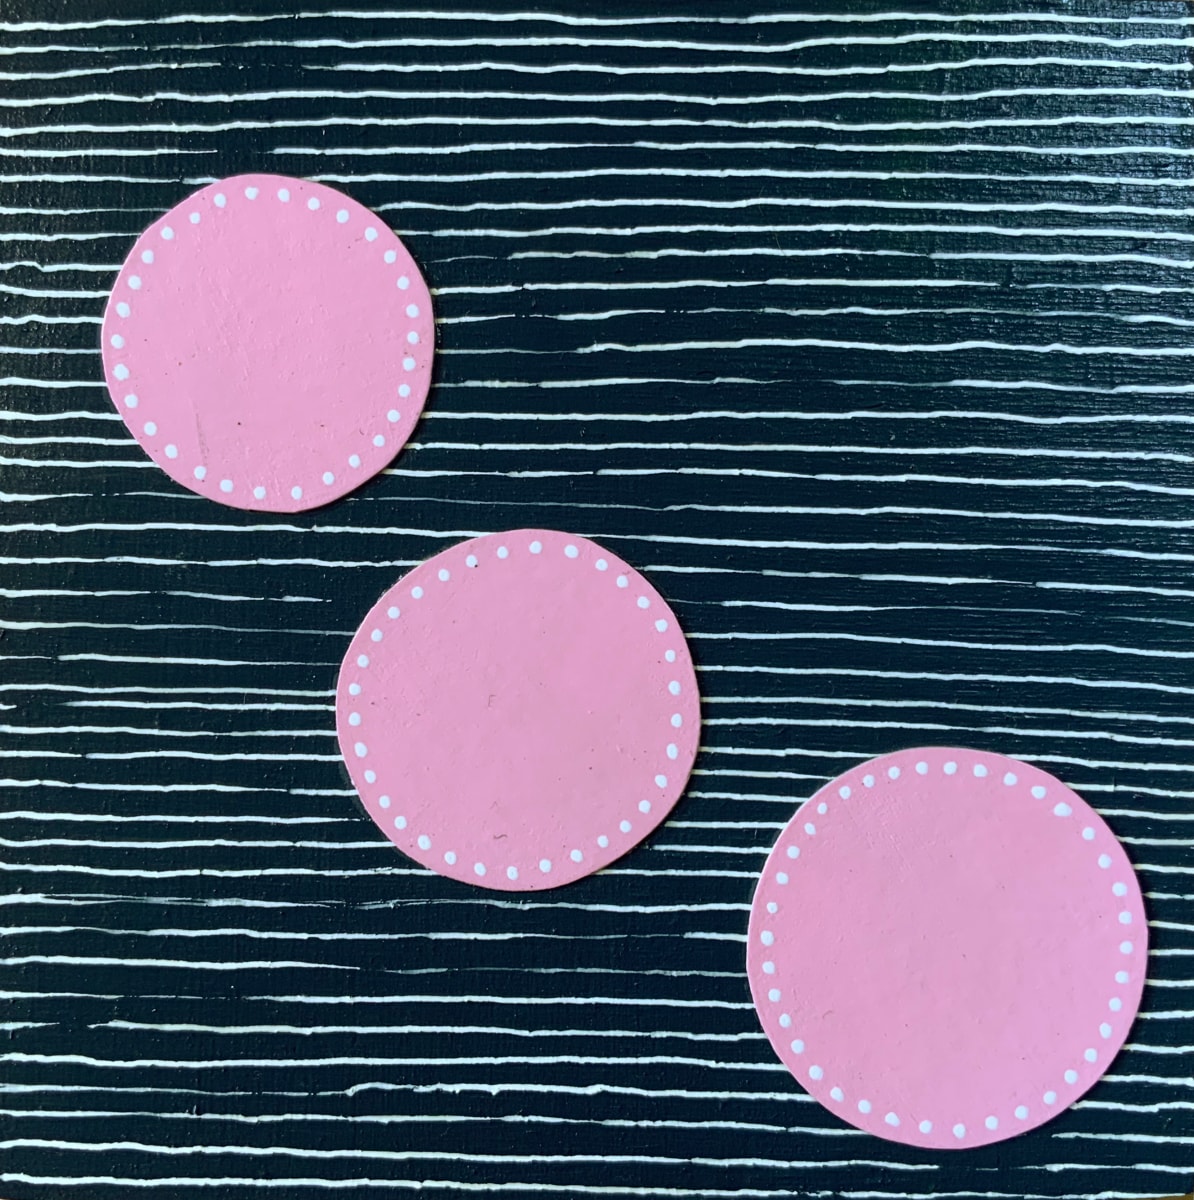 Dots 34, Navy Pattern + Pink Dots by Suzanne Gibbs  Image: Dots 34, Navy Pattern + Pink Dots | Mini Painting on Wood | Mixed Media | 4 x 4 inches